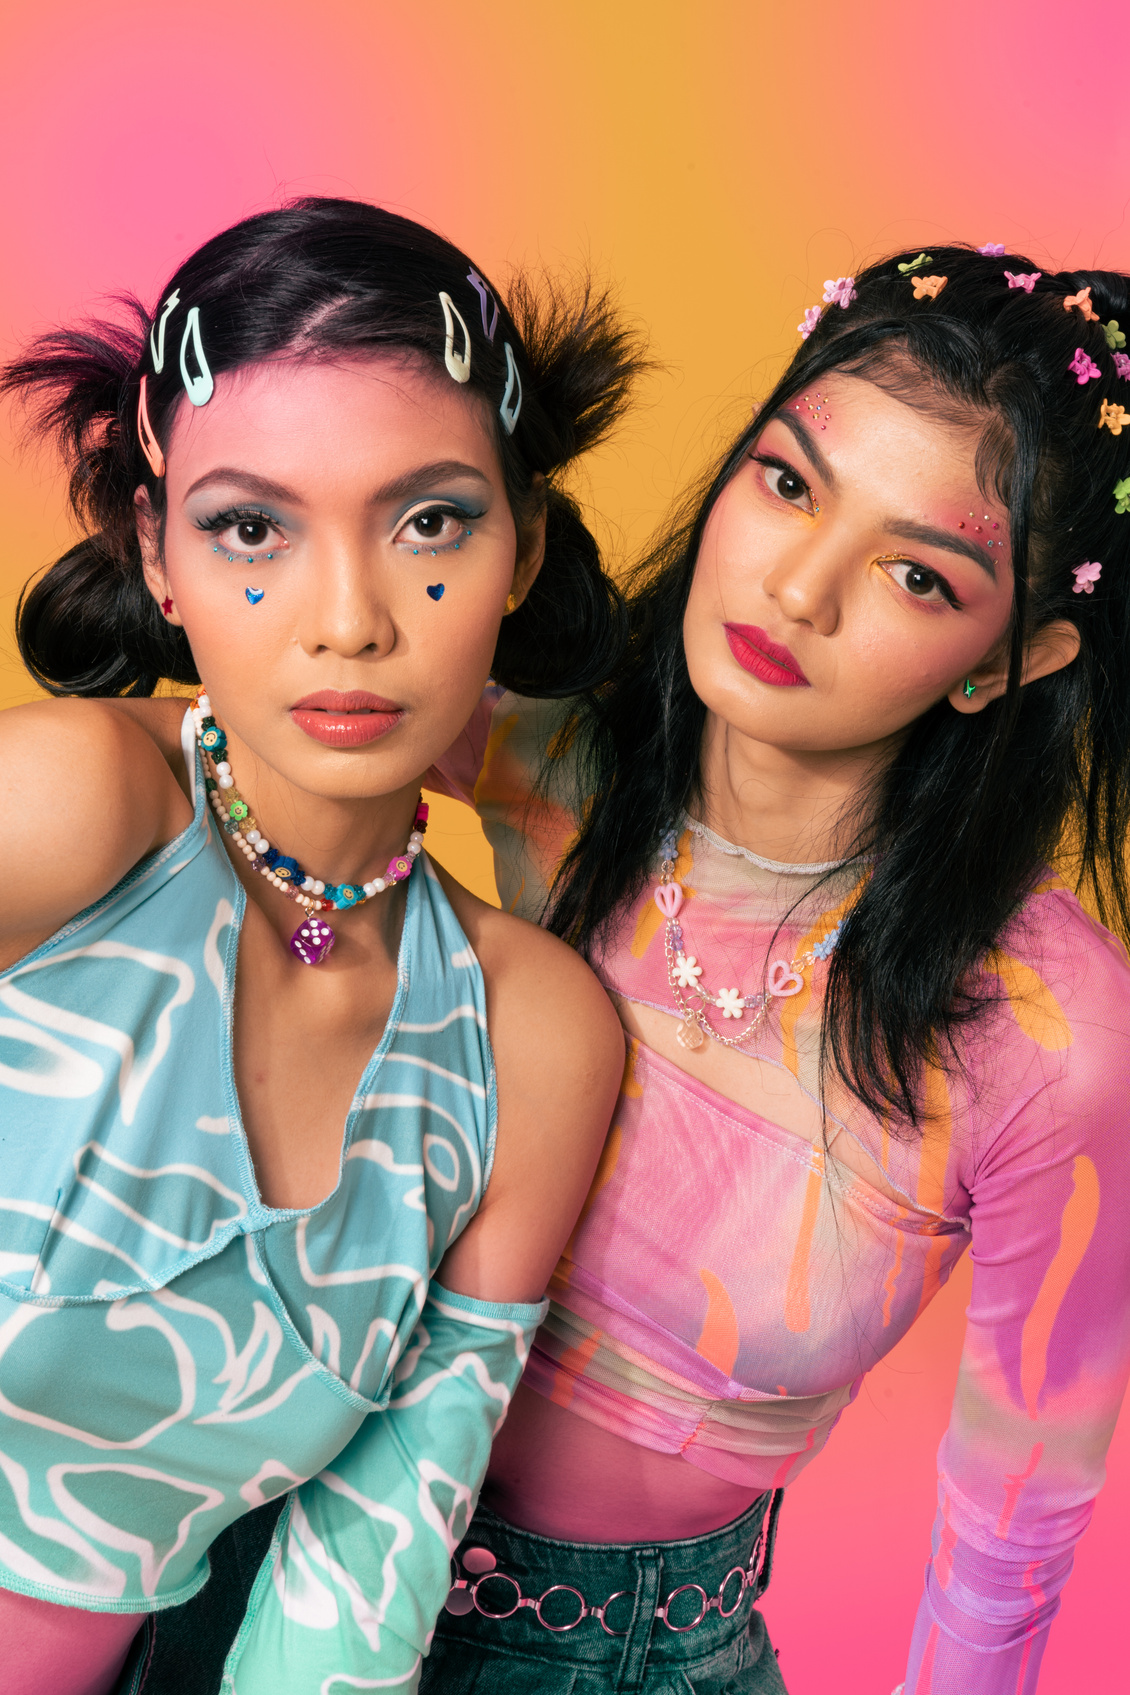 Portrait of Two Women in Retro Outfit on Multicolored Background